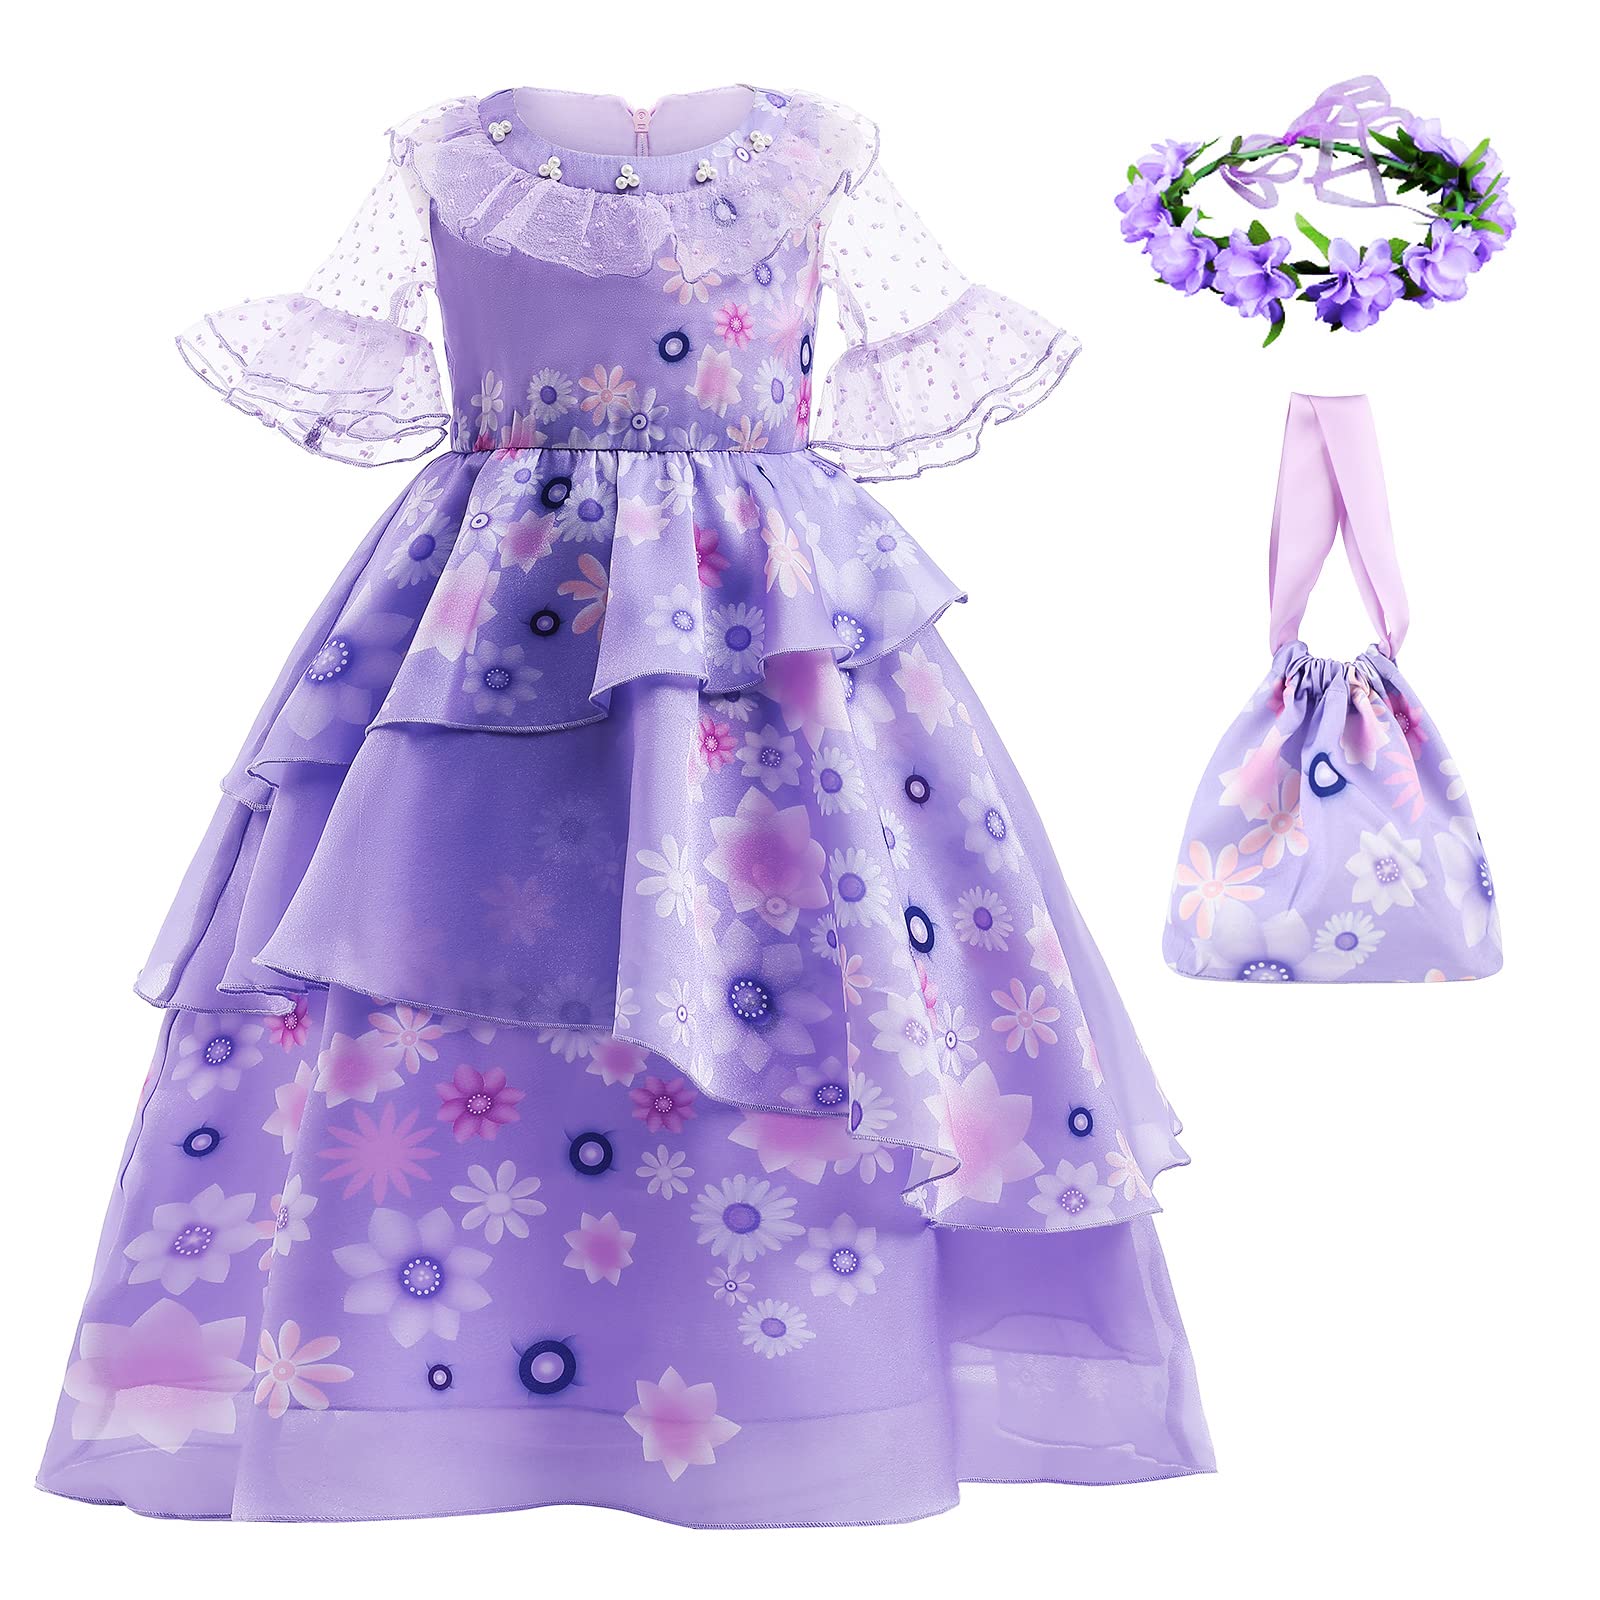 HBTKXIAWEI Magic Family Dress Costume Toddler Girls Cosplay Princess Outfits Kids Halloween Stage Show Party Dress Up (6-7 Years